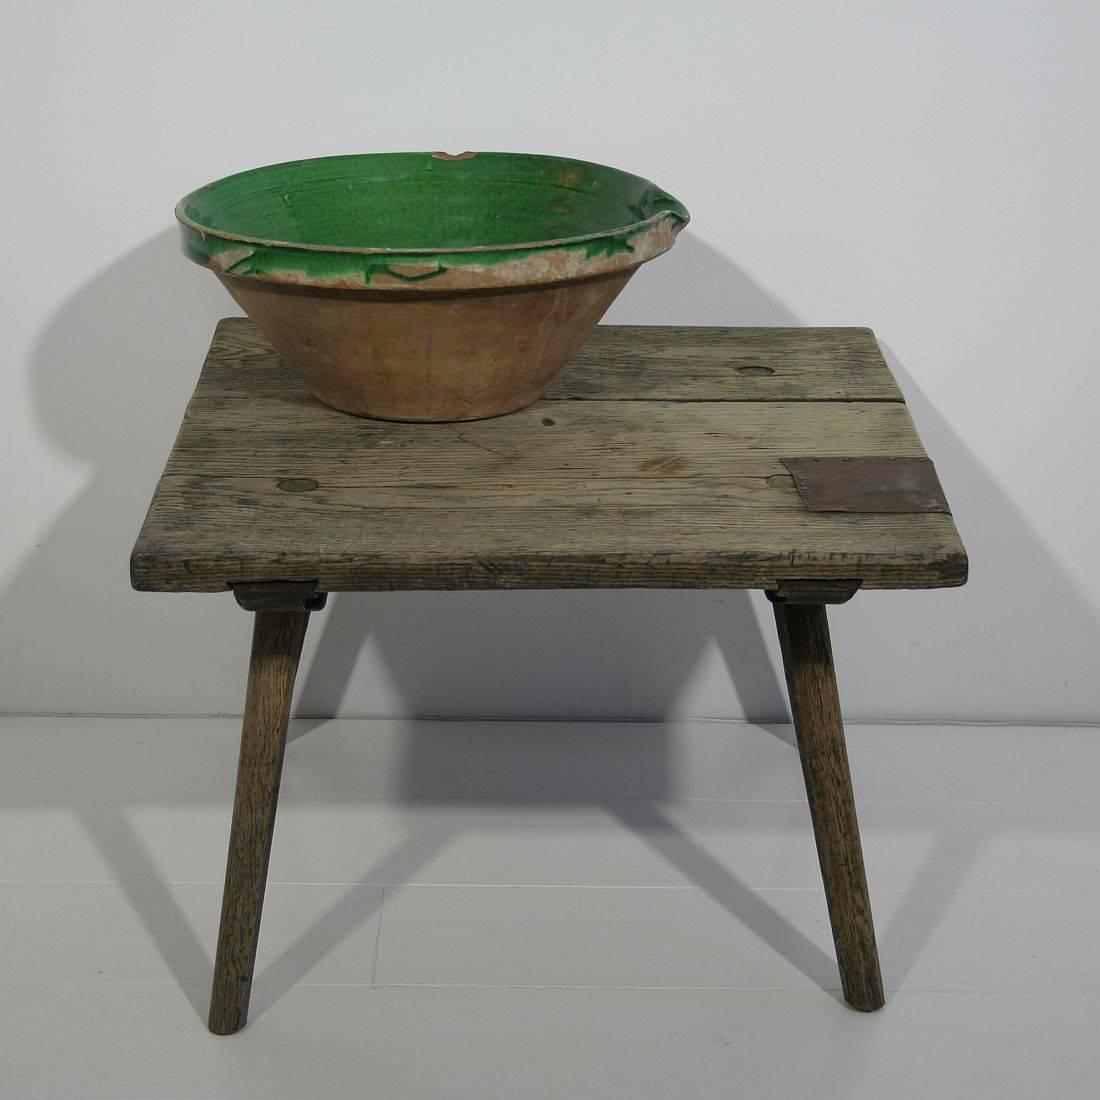 Rustic small oak table. Beautiful weathered piece with a very nice repair at the top. This would be a very nice small side table or coffee table, France, circa 1800. Weathered, losses and old repair.